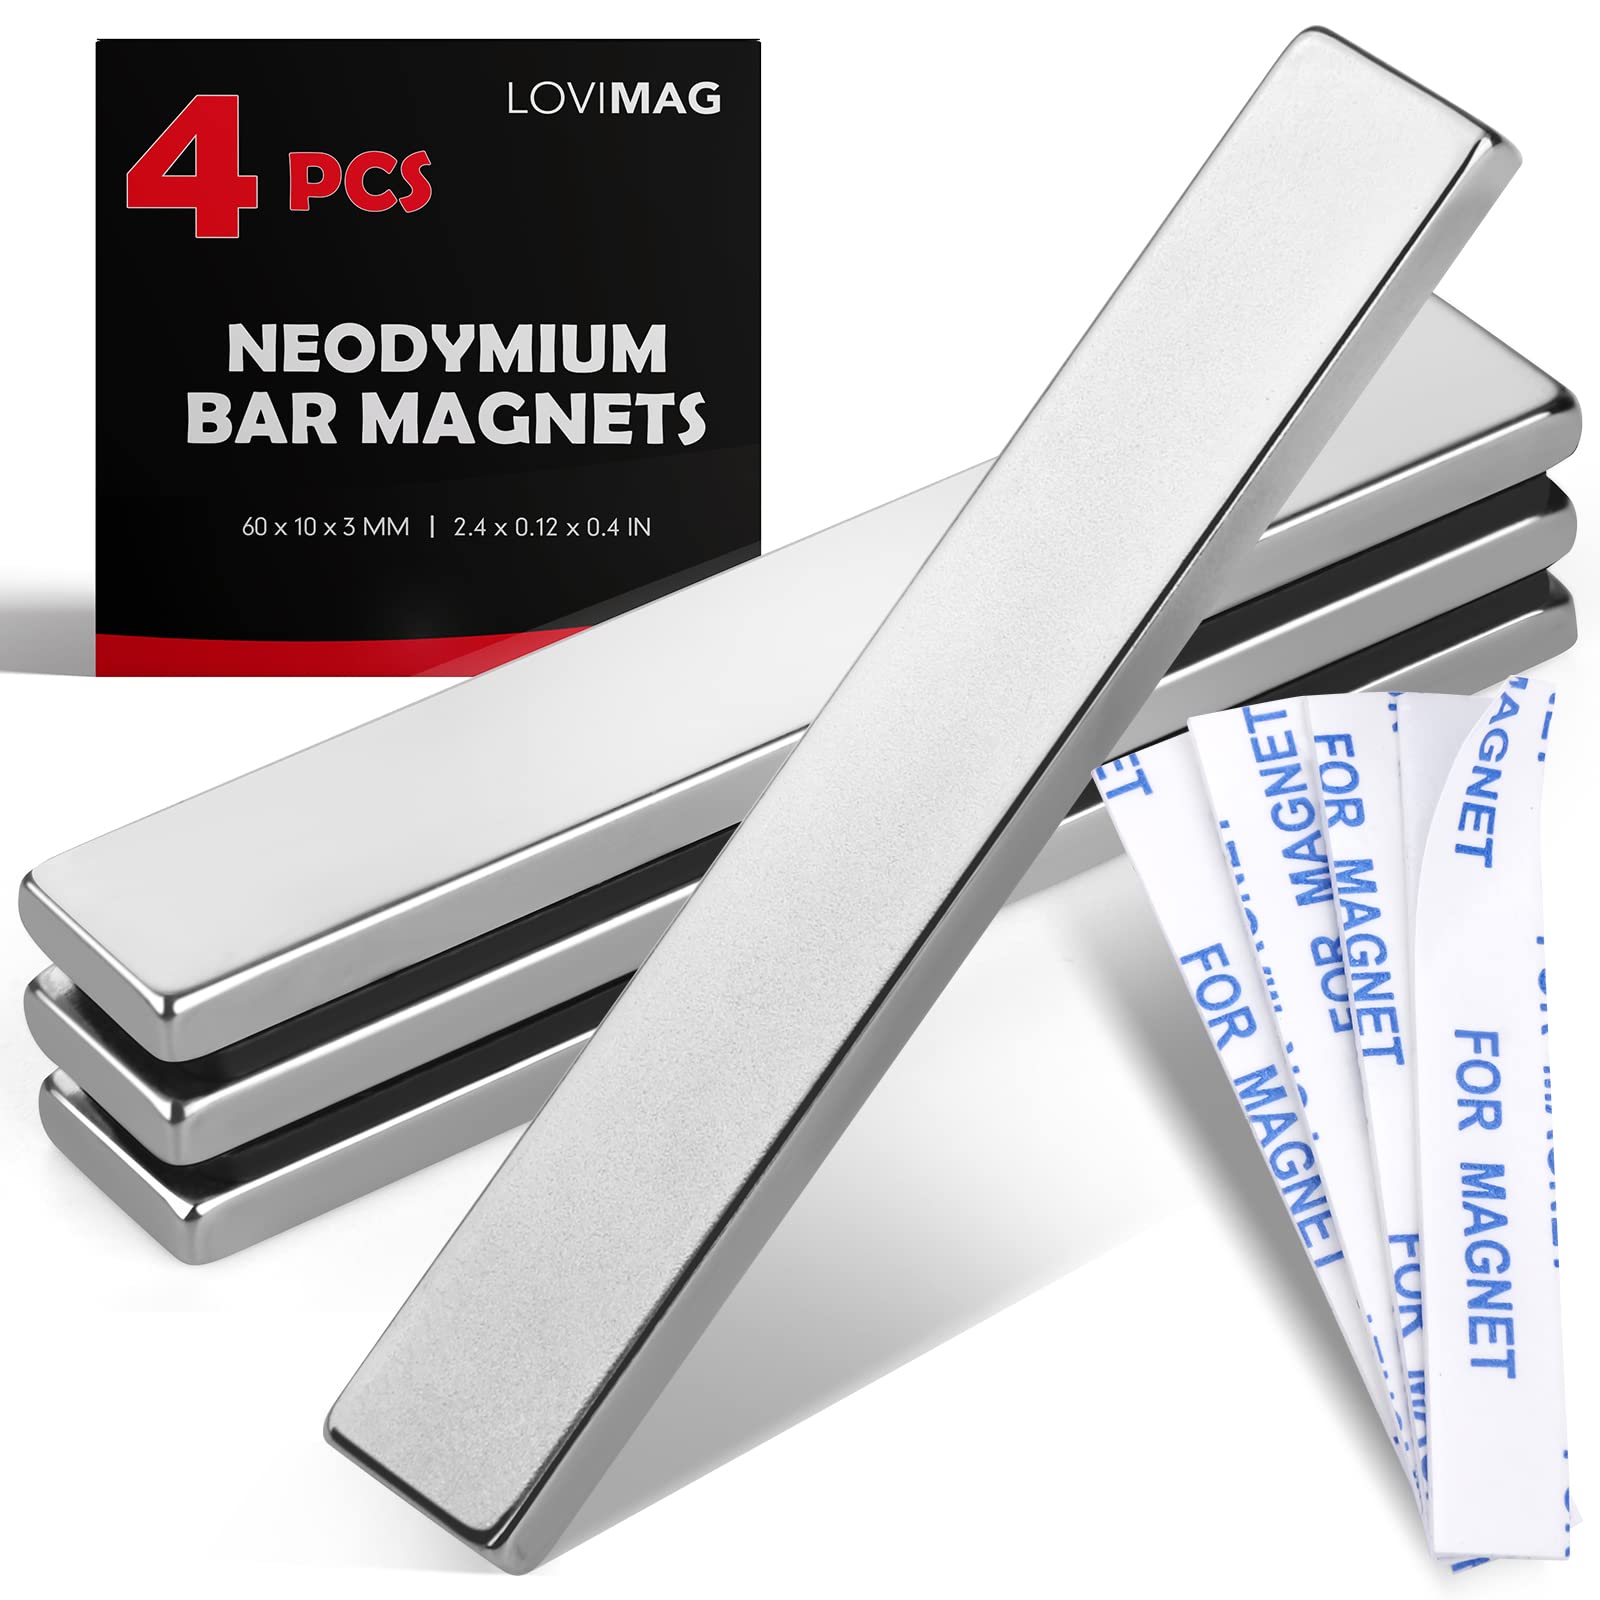 LOVIMAG Strong Neodymium Bar Magnets with Double-Sided Adhesive, Rare Earth Metal Neodymium Magnet for Fridge, Scientific, Showe